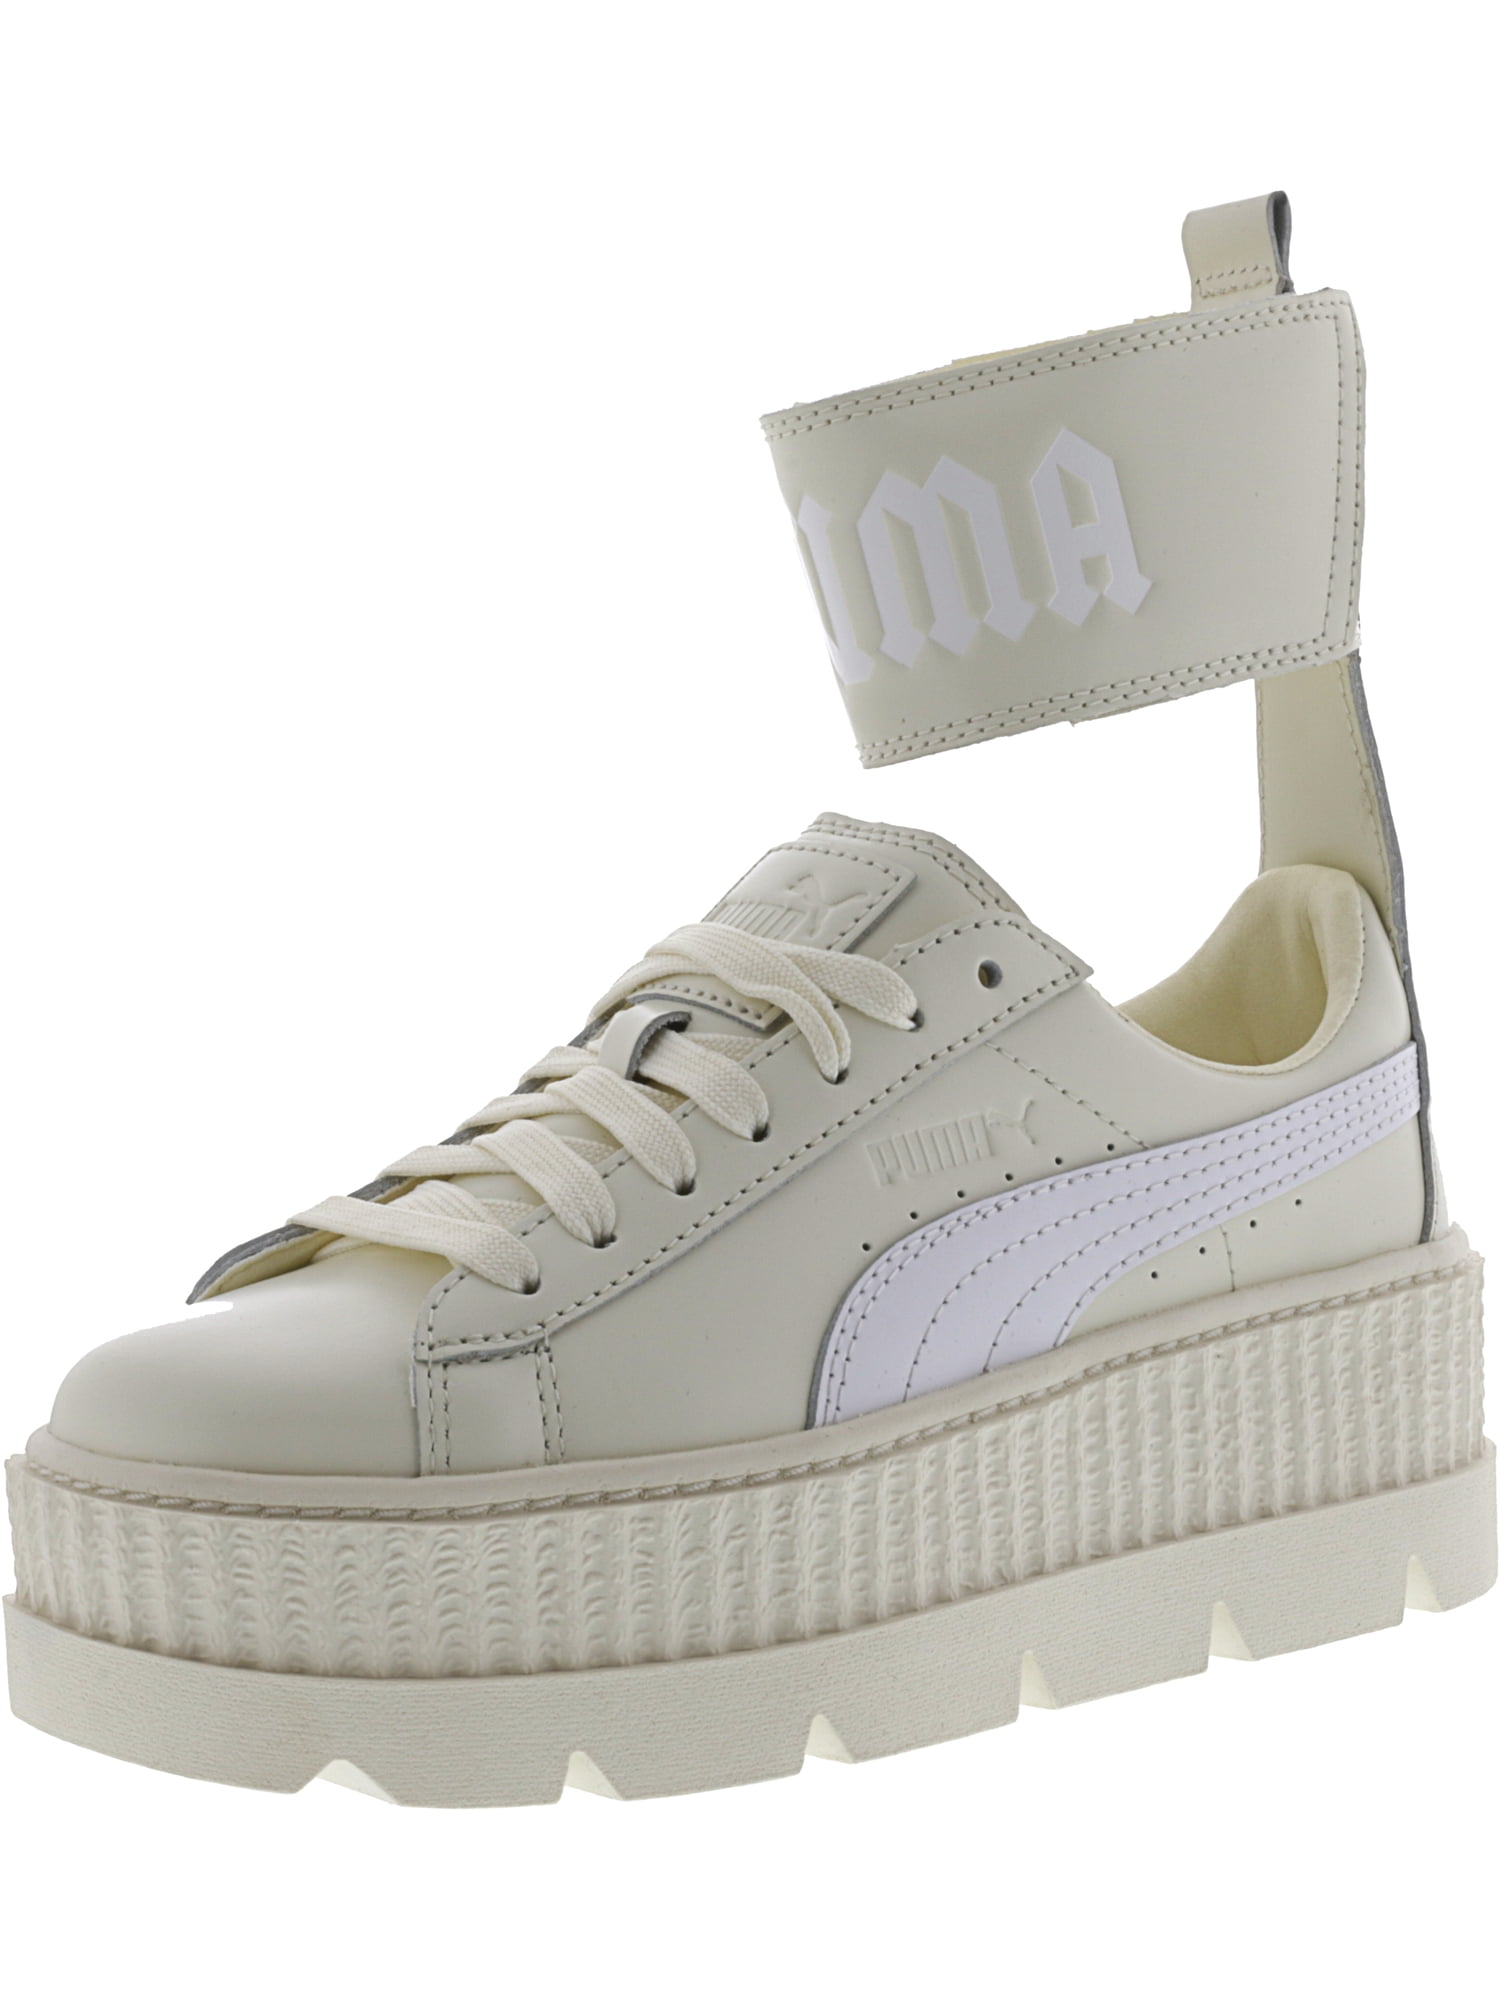 puma shoes with ankle strap